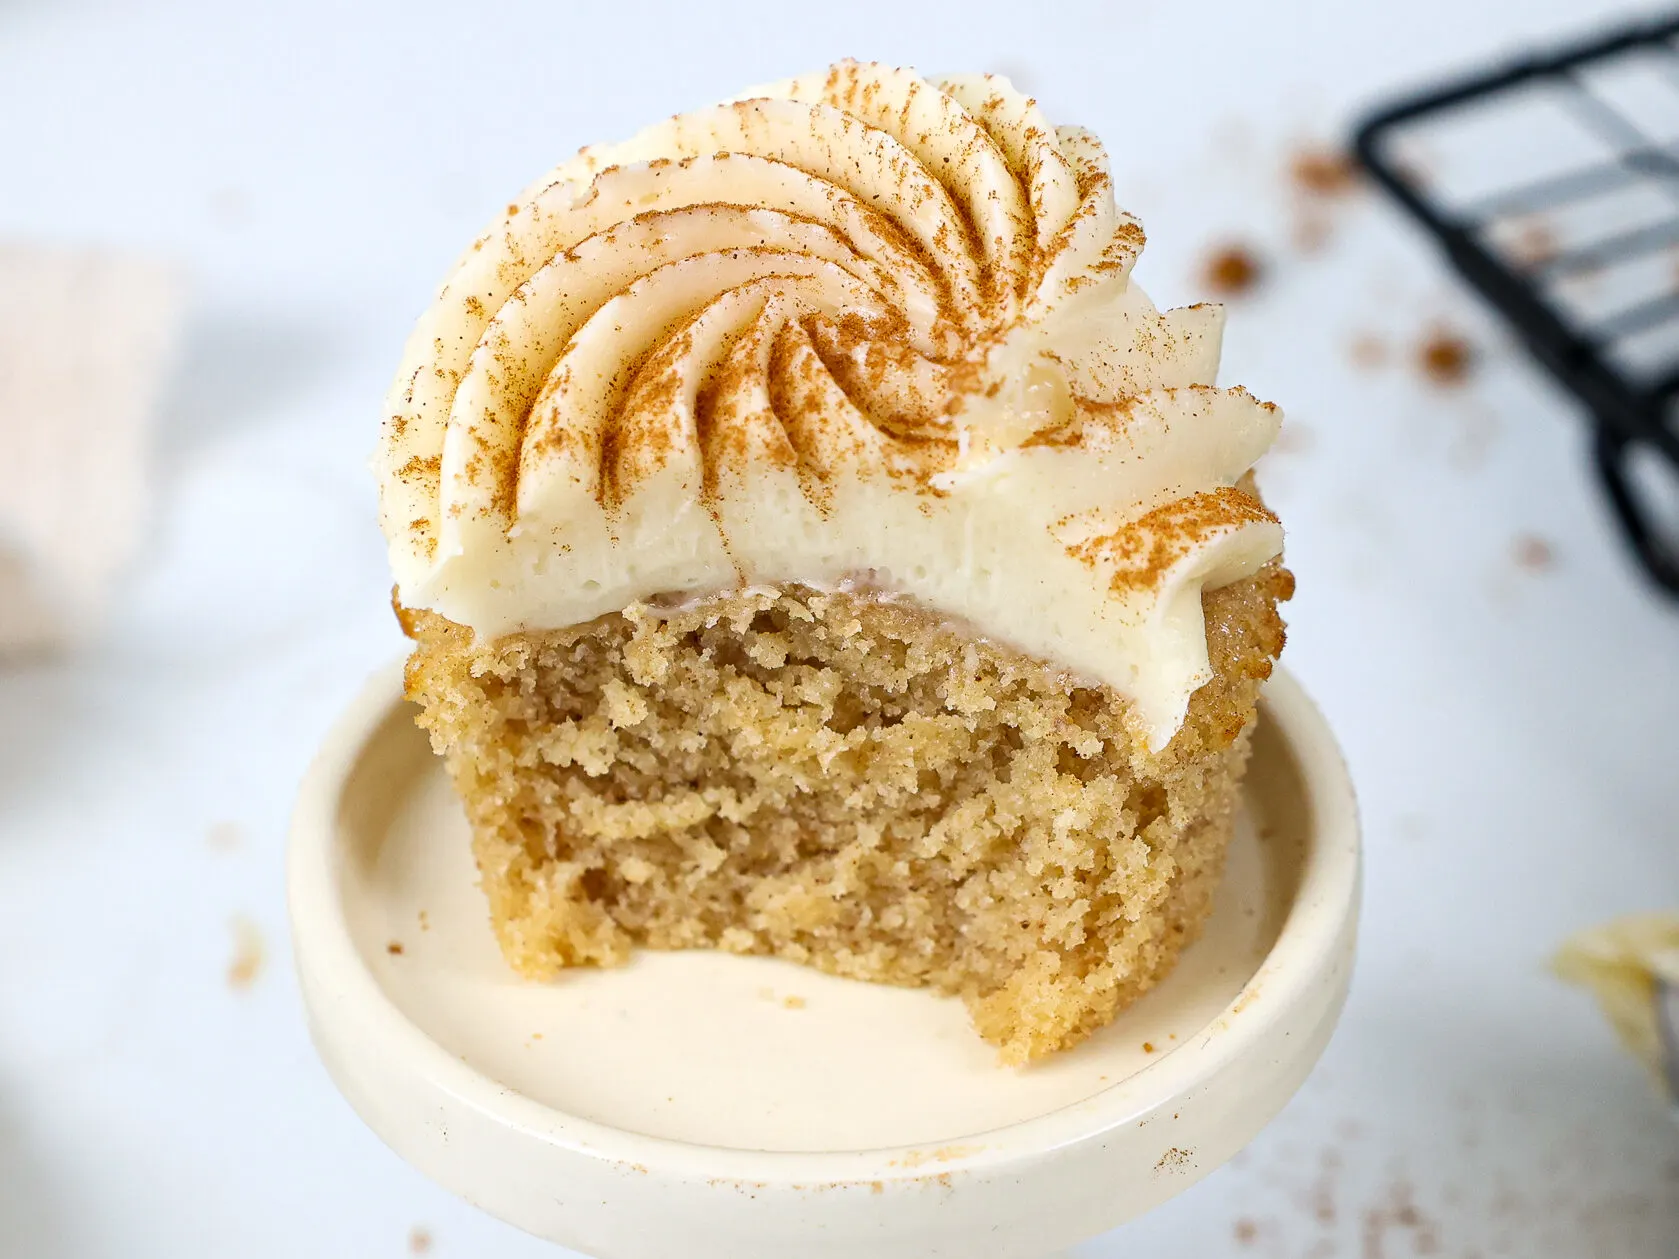 image of a spice cake that's been bitten into to show how moist and tender the cupcake is